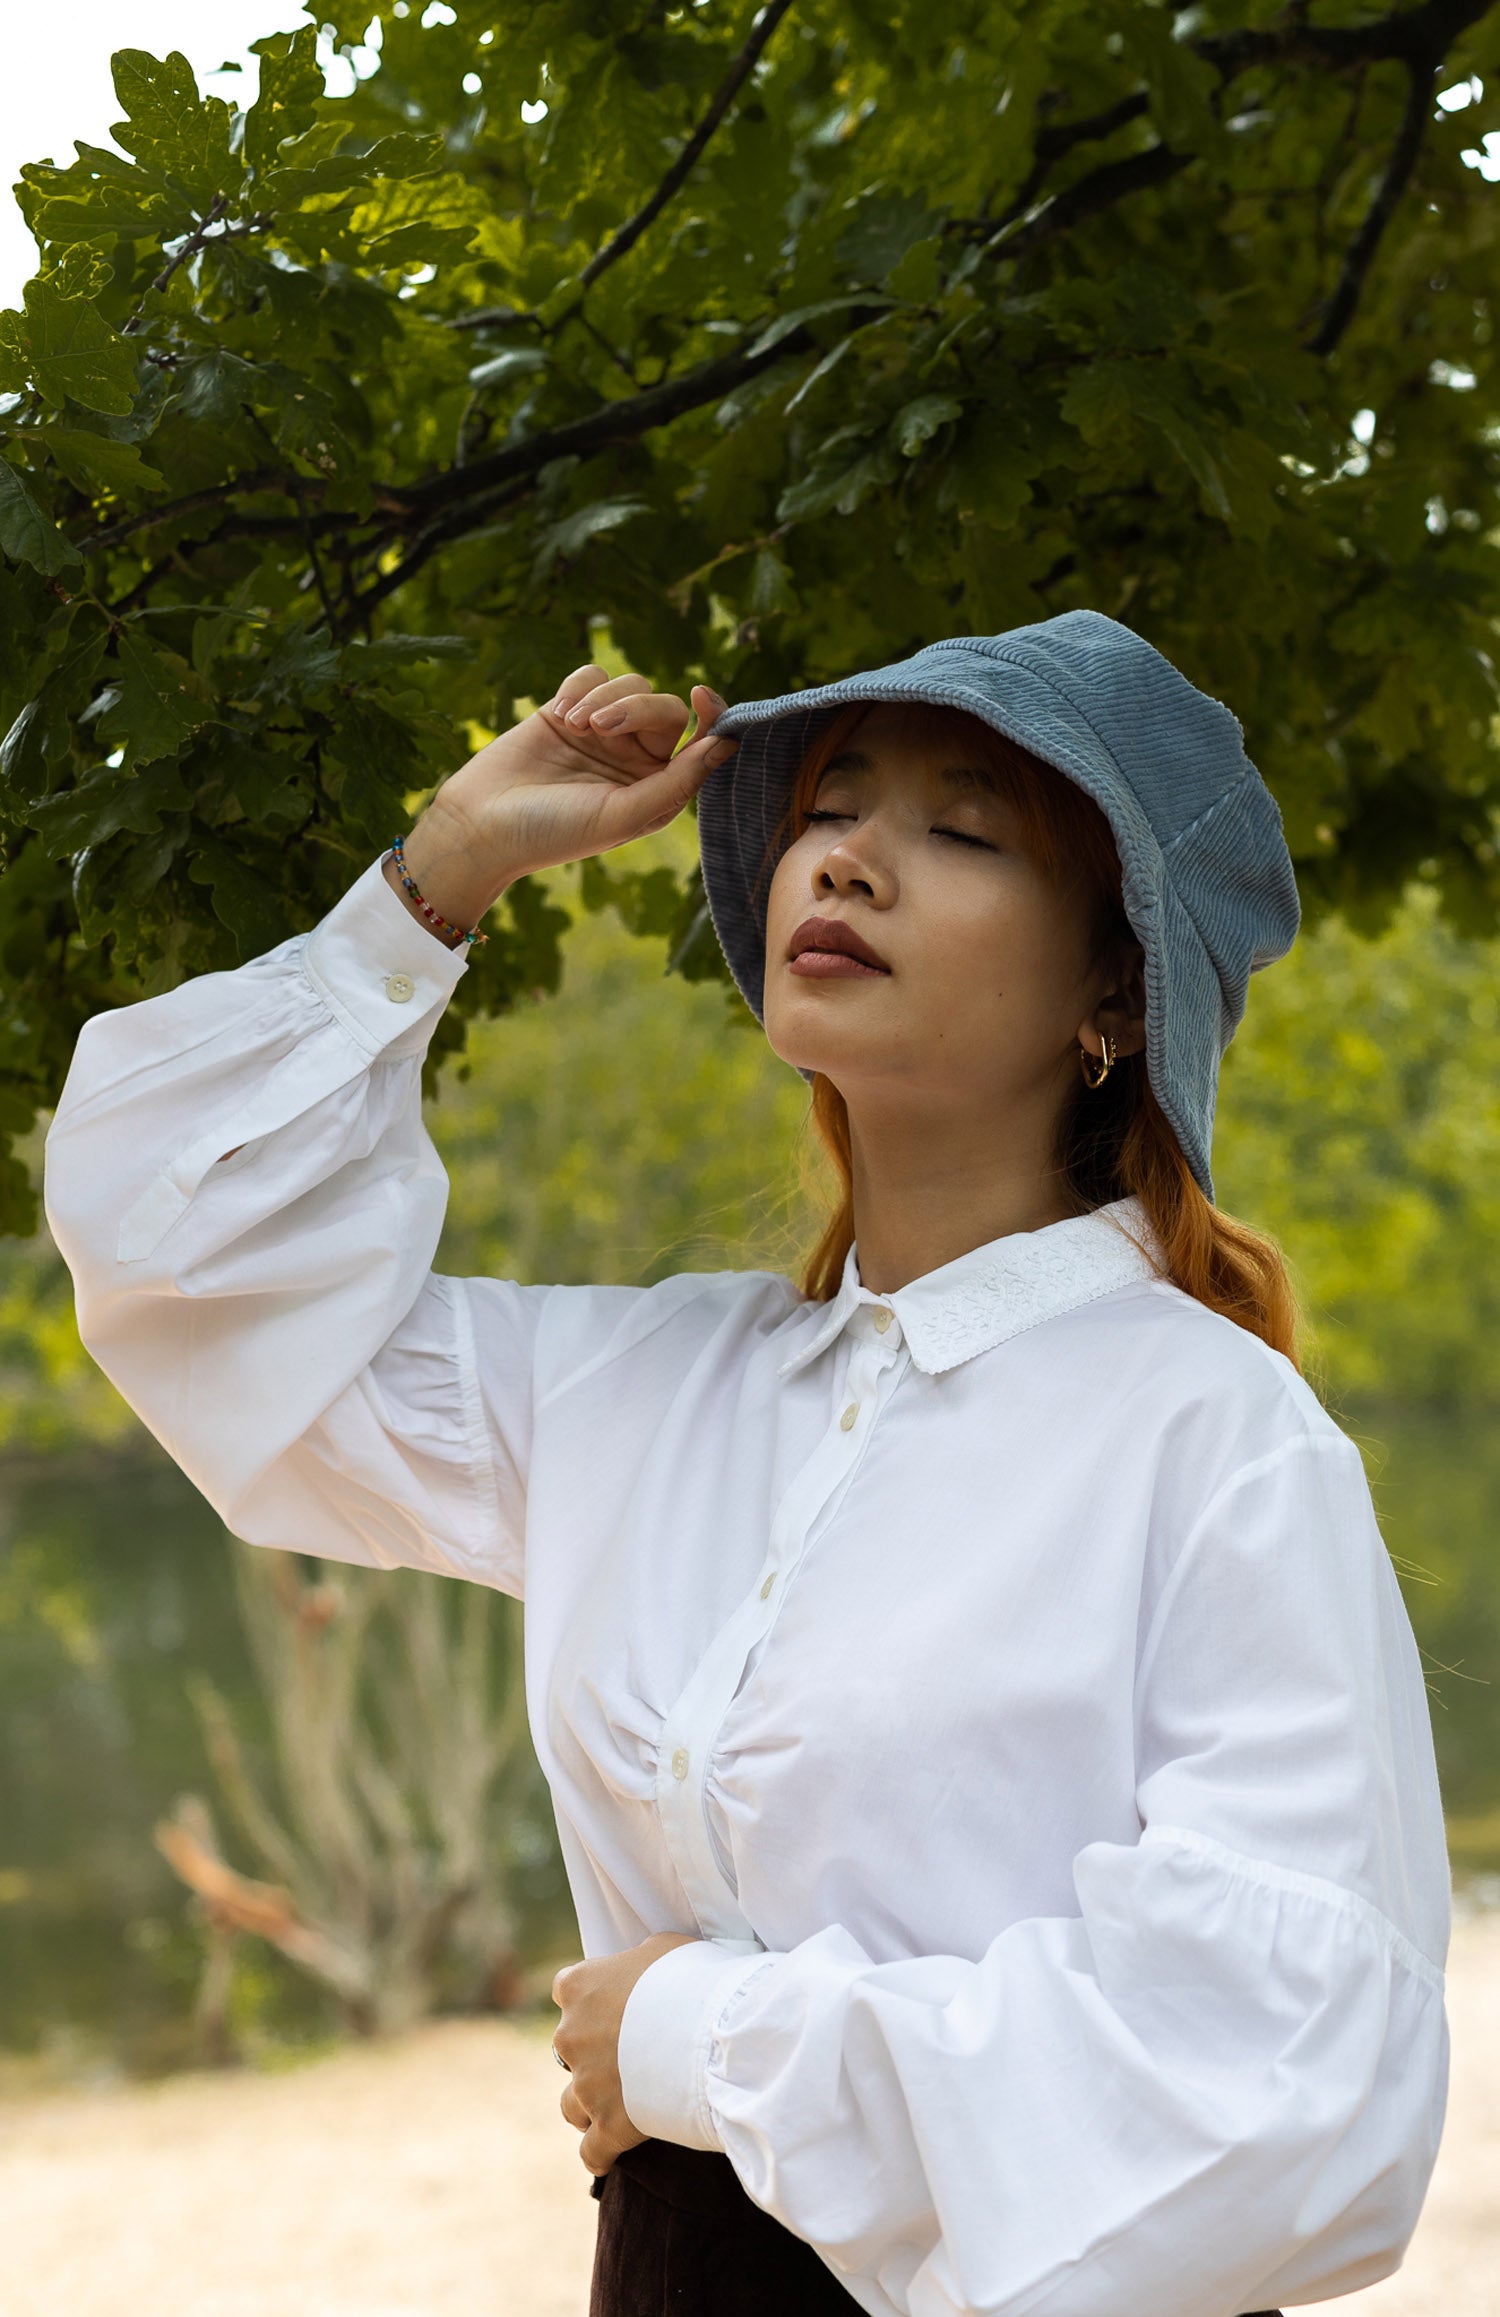 Model wears Saywood's Edi Volume Sleeve Shirt in white Supima cotton and bamboo. She has one hand across her waist, and the other hand holding the tip of a blue cord bucket hat on her head.